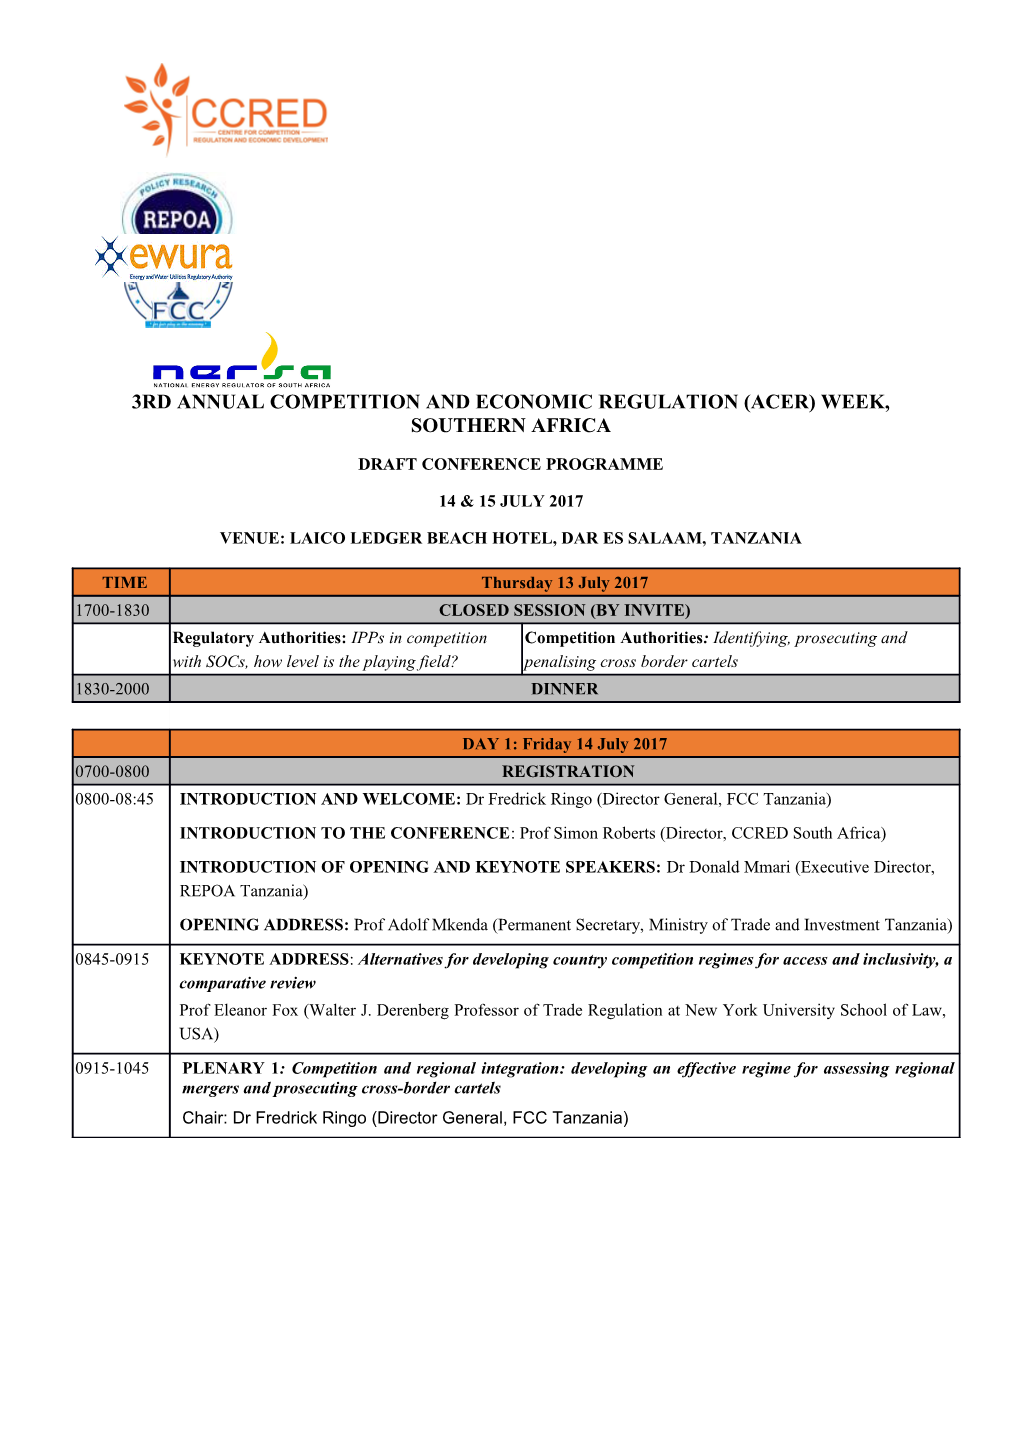 3Rd Annual Competition and Economic Regulation (Acer) Week, Southern Africa